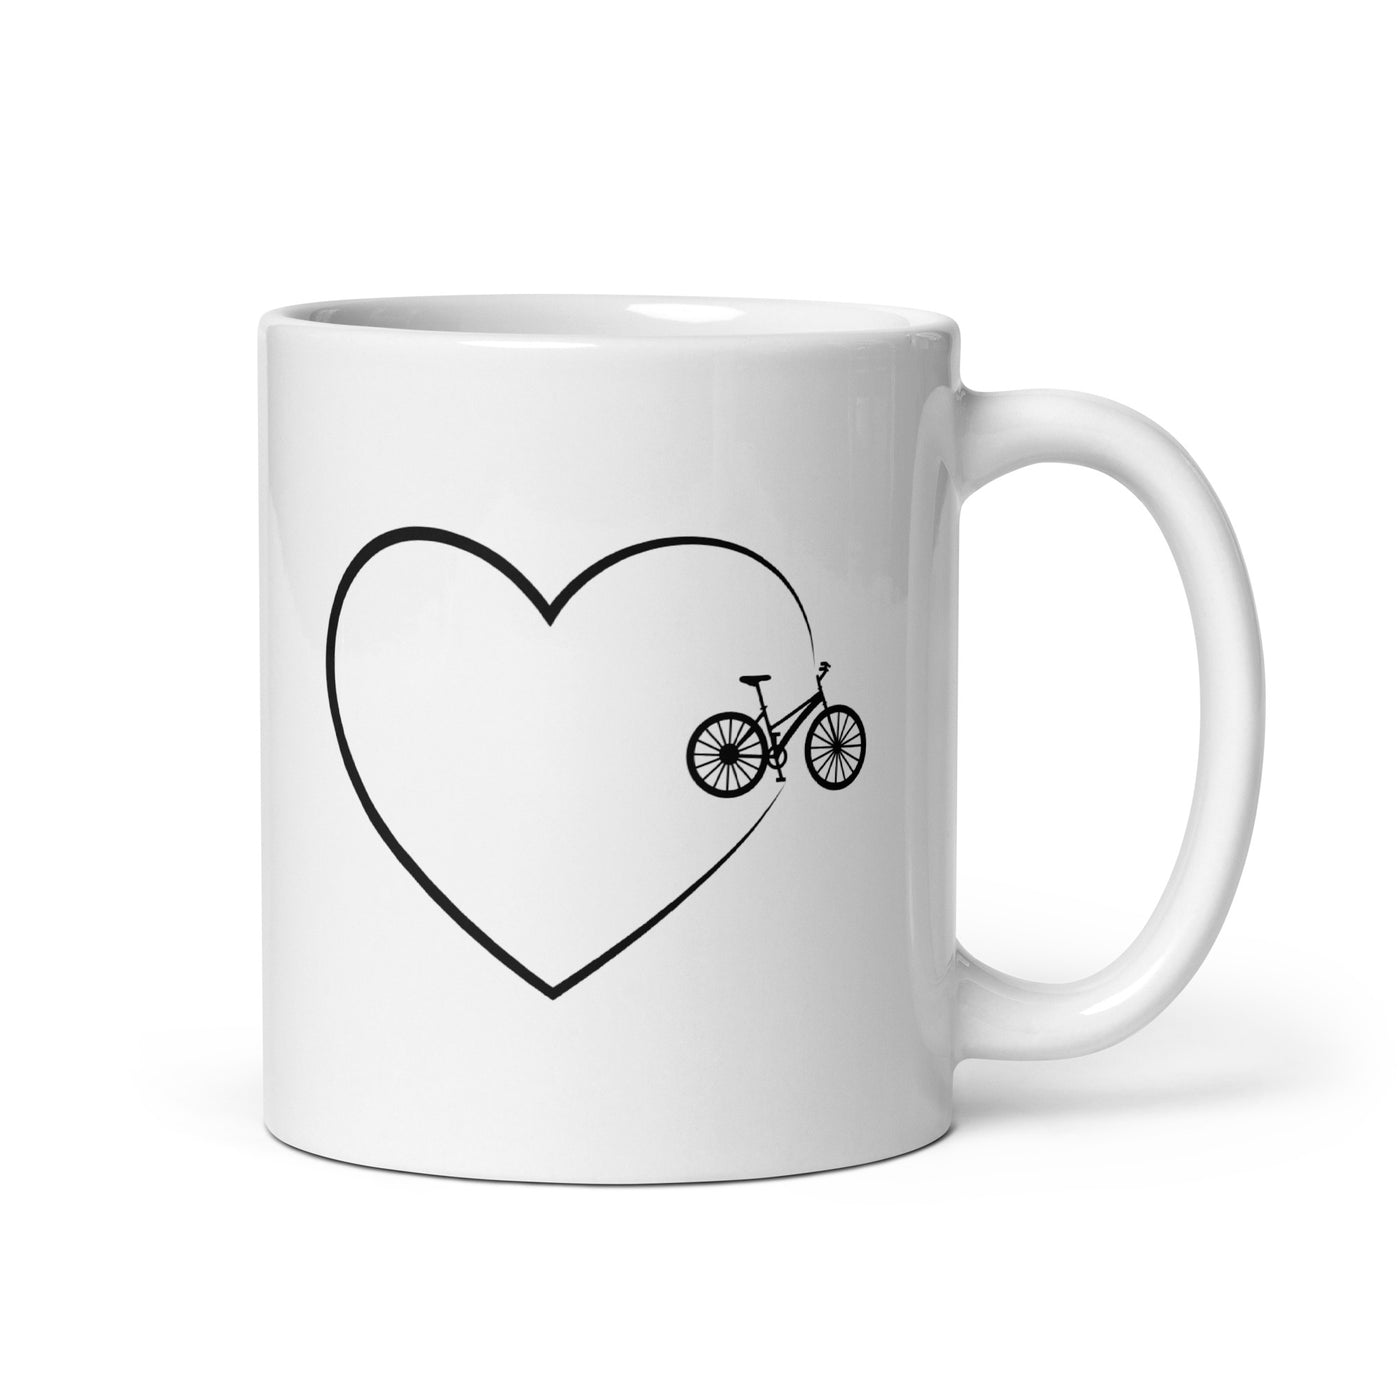 Heart 2 And Bicycle - Tasse fahrrad